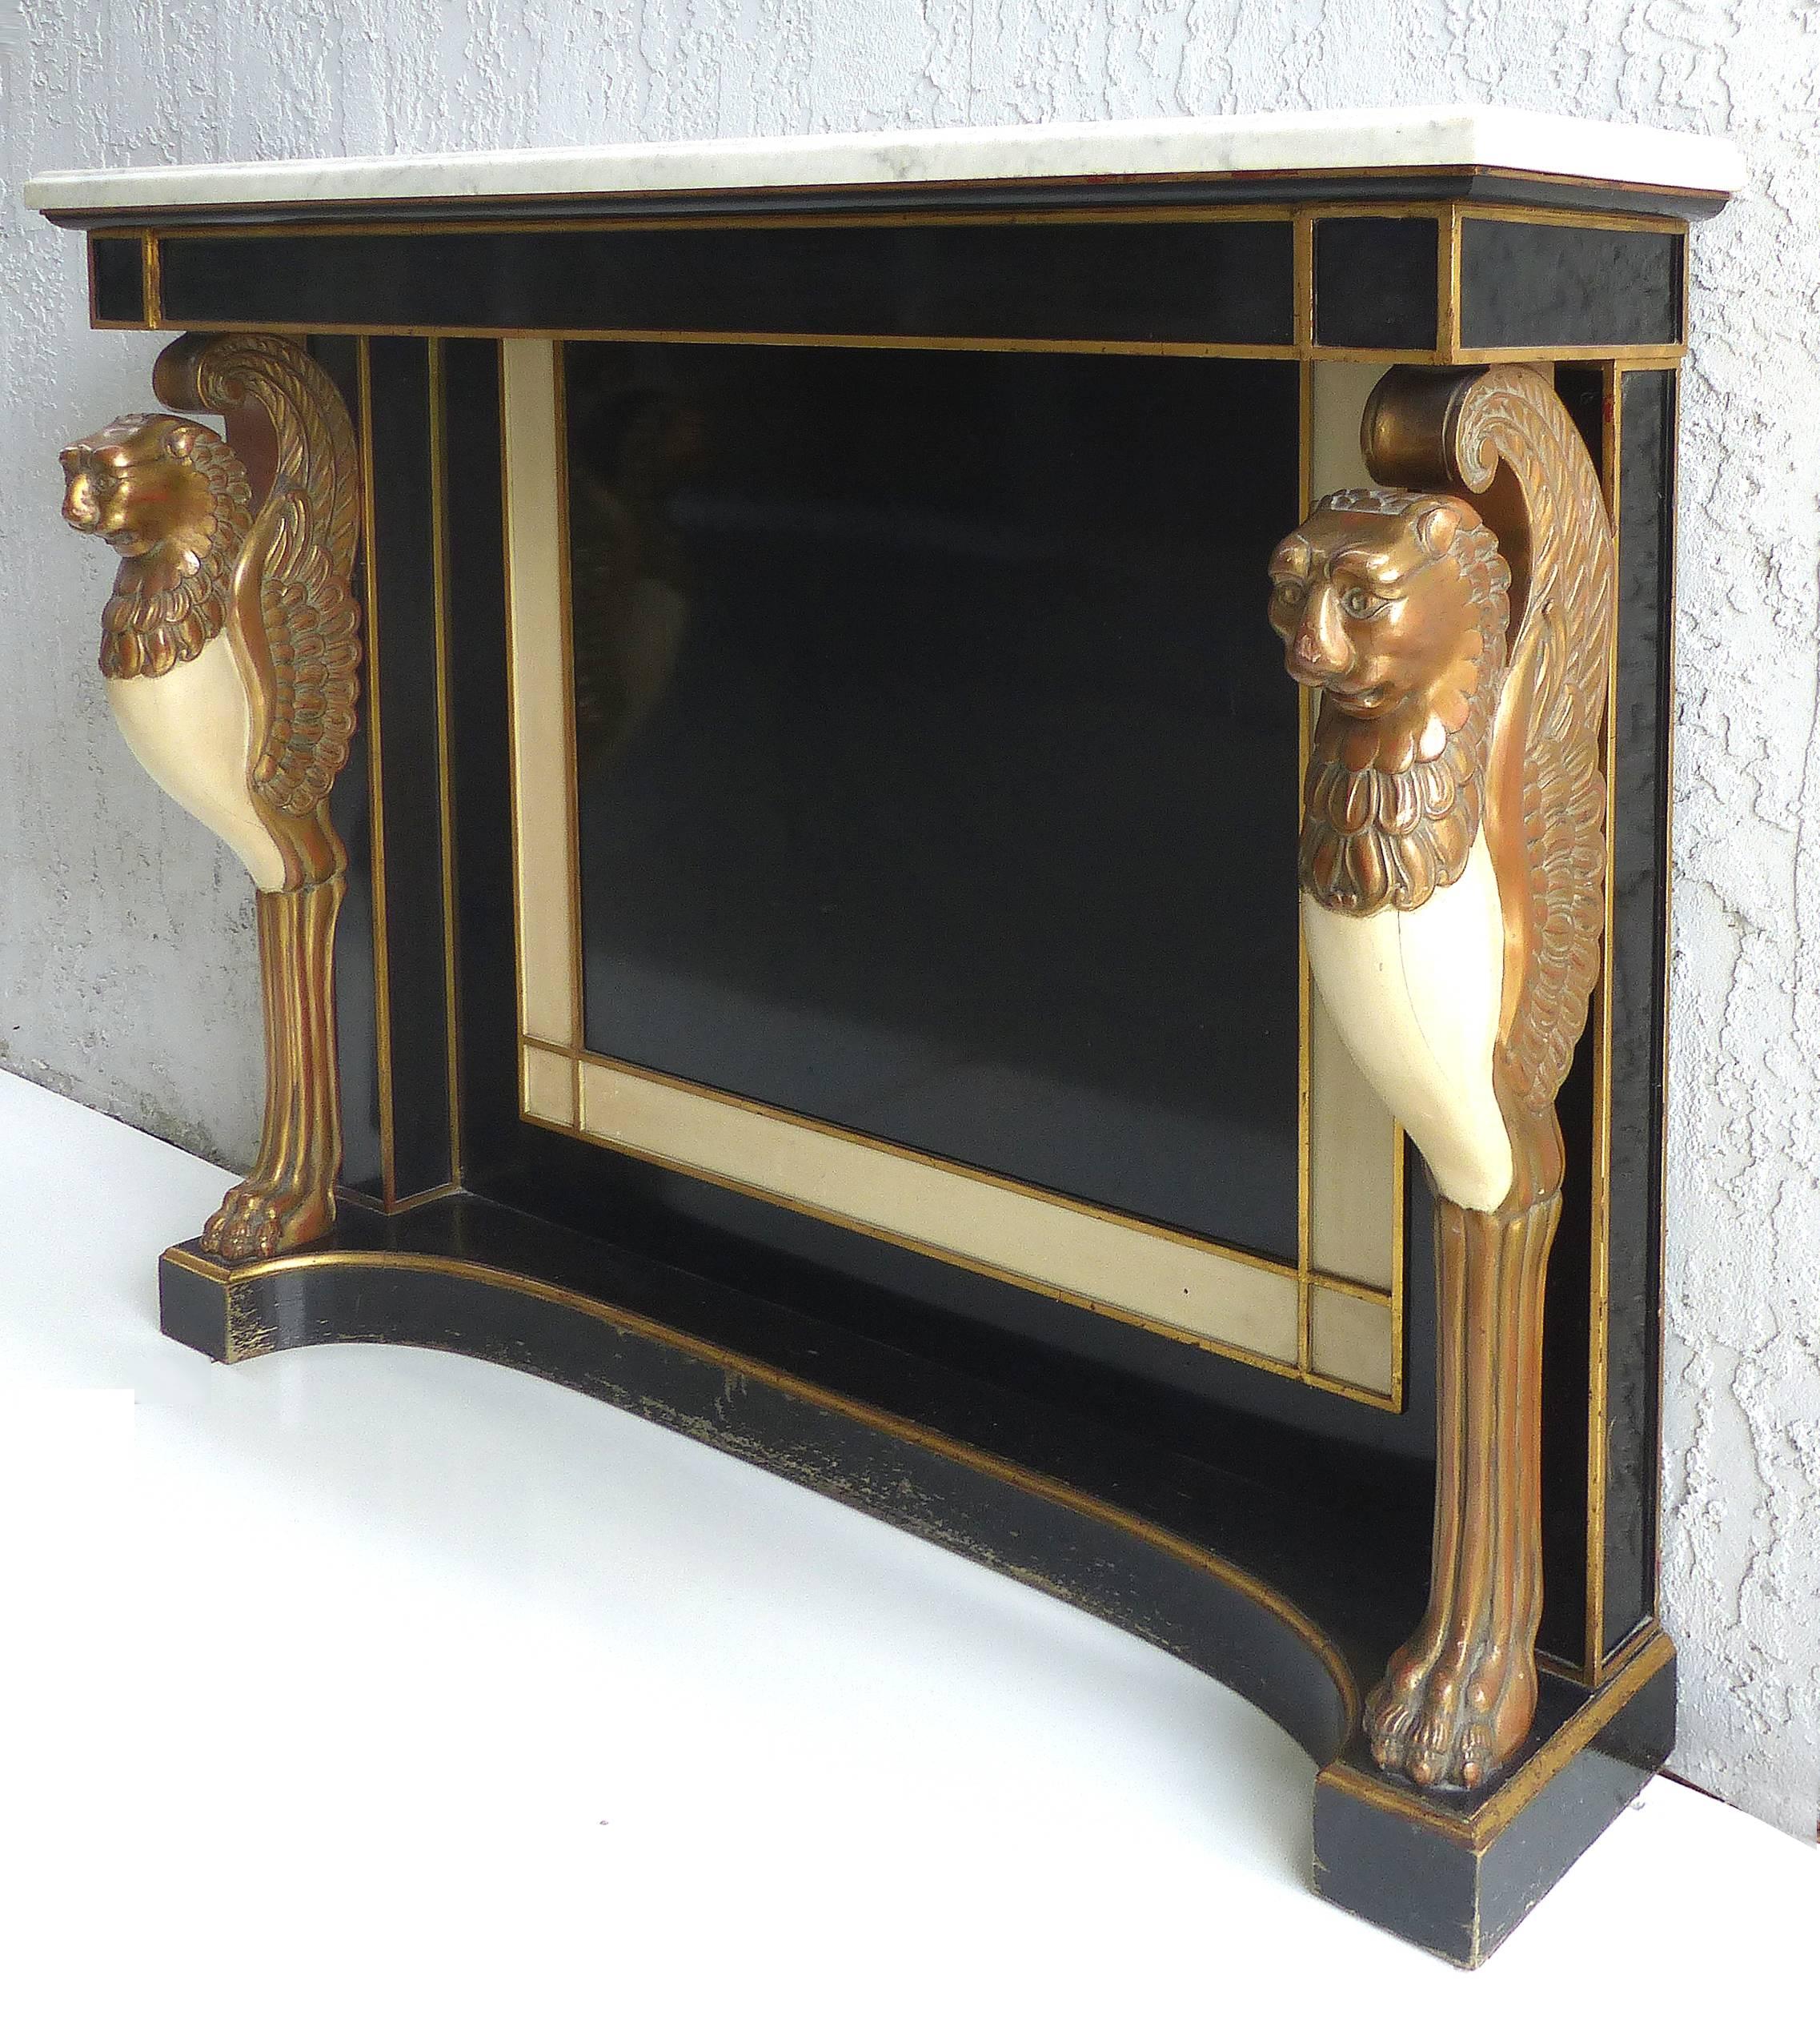 Carved Wood and Marble Empire Revival Console Table, Manner of Maison Jansen

Offered for sale is an elegant carved and lacquered wood Empire Revival console table with a marble top. The console was created, circa 1920-1930 in the manner of Maison